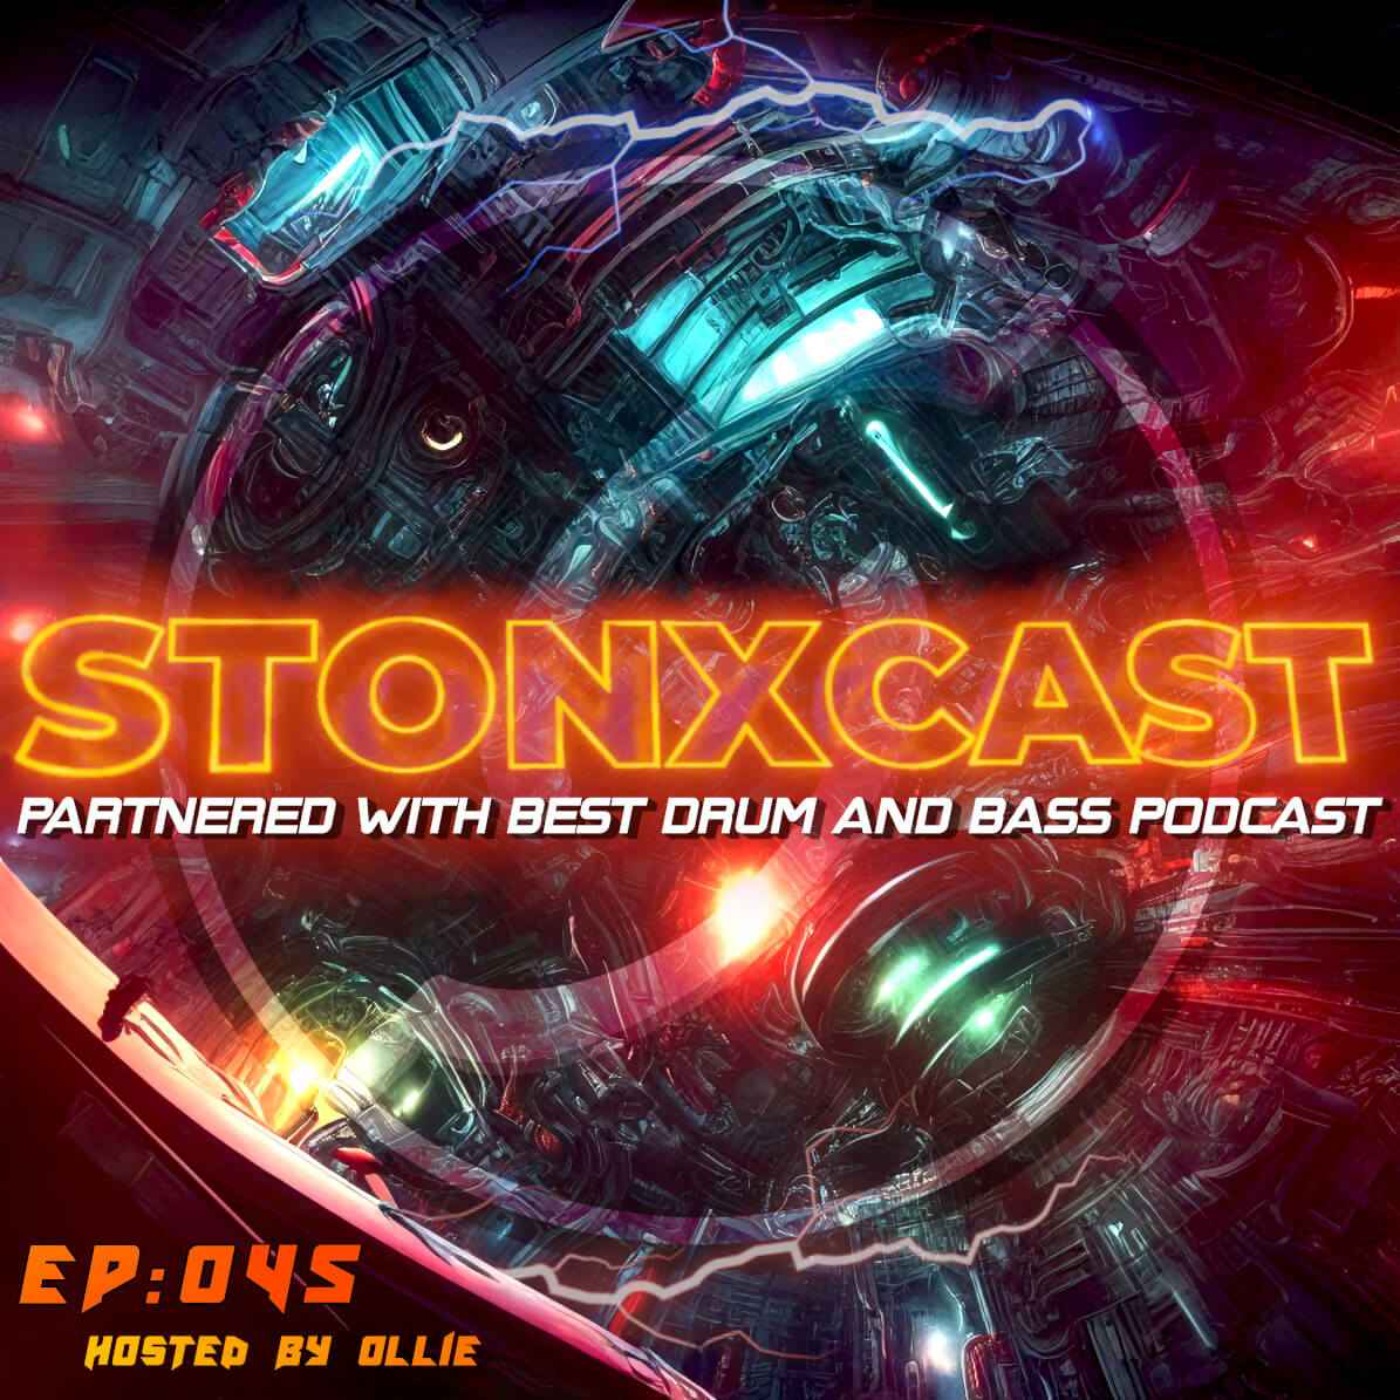 Stonxcast EP:045 - Hosted by Ollie Artwork